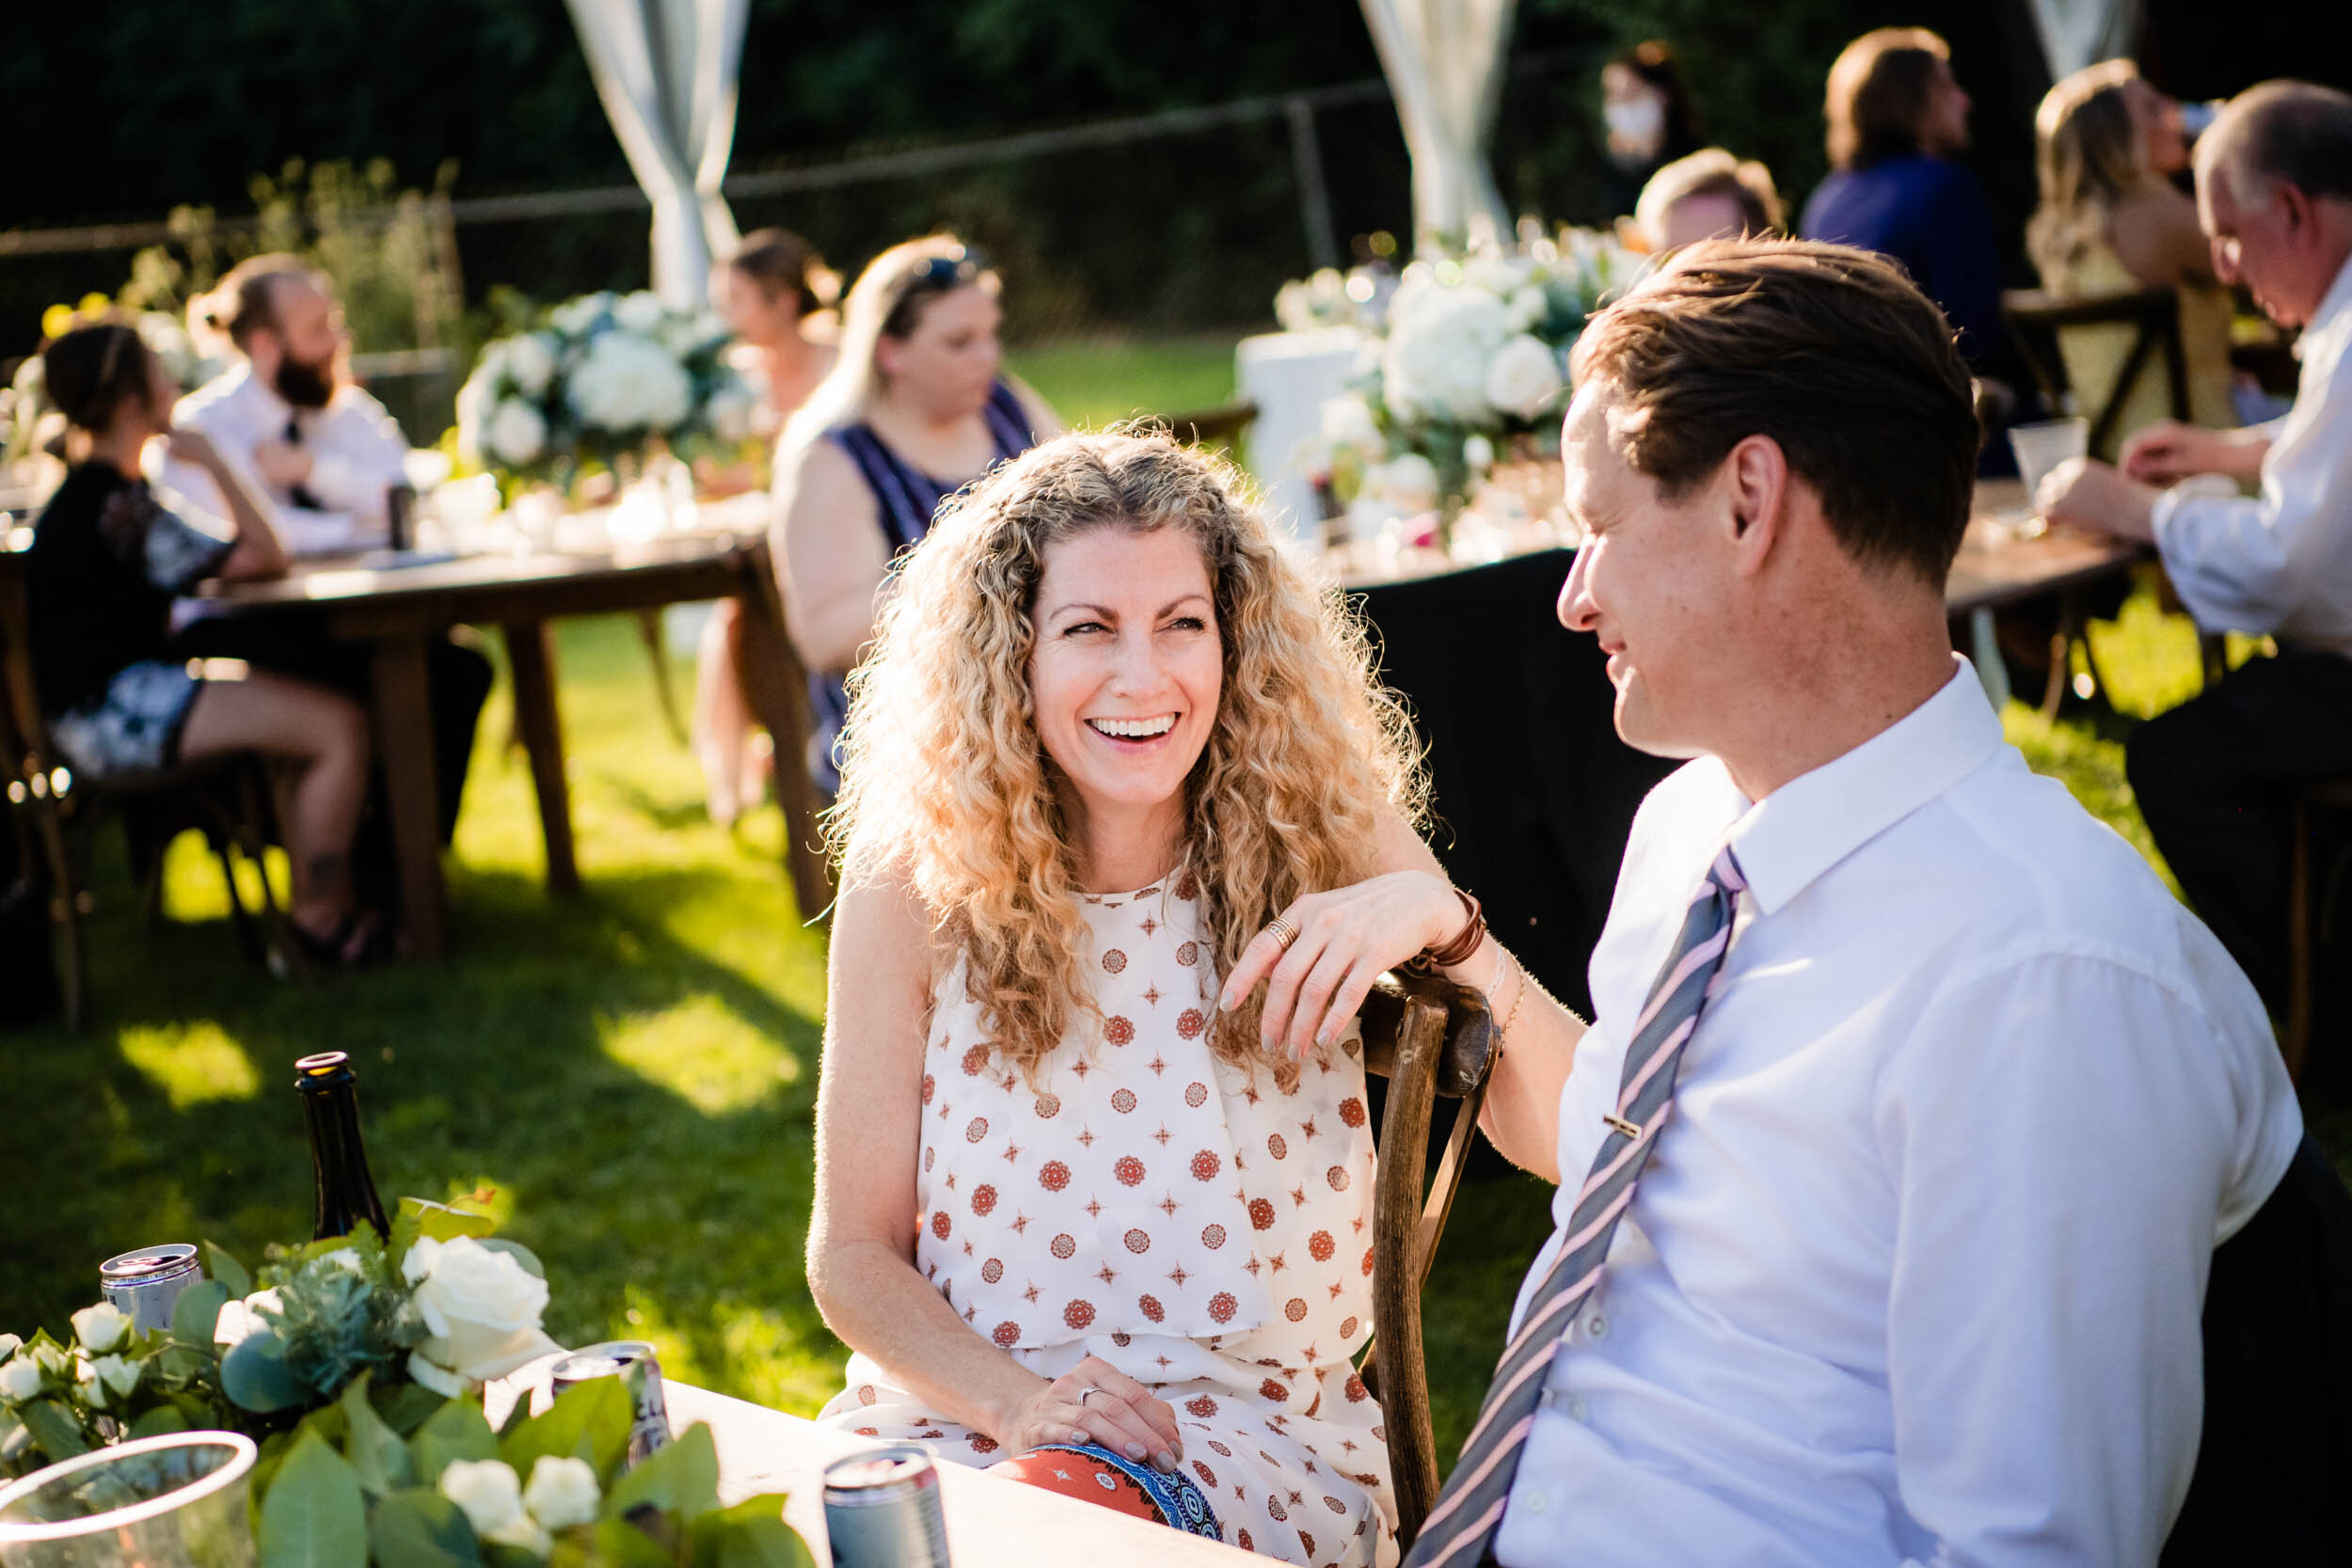 Guests laugh and talk during the reception:  Chicago backyard wedding photographed by J. Brown Photography.